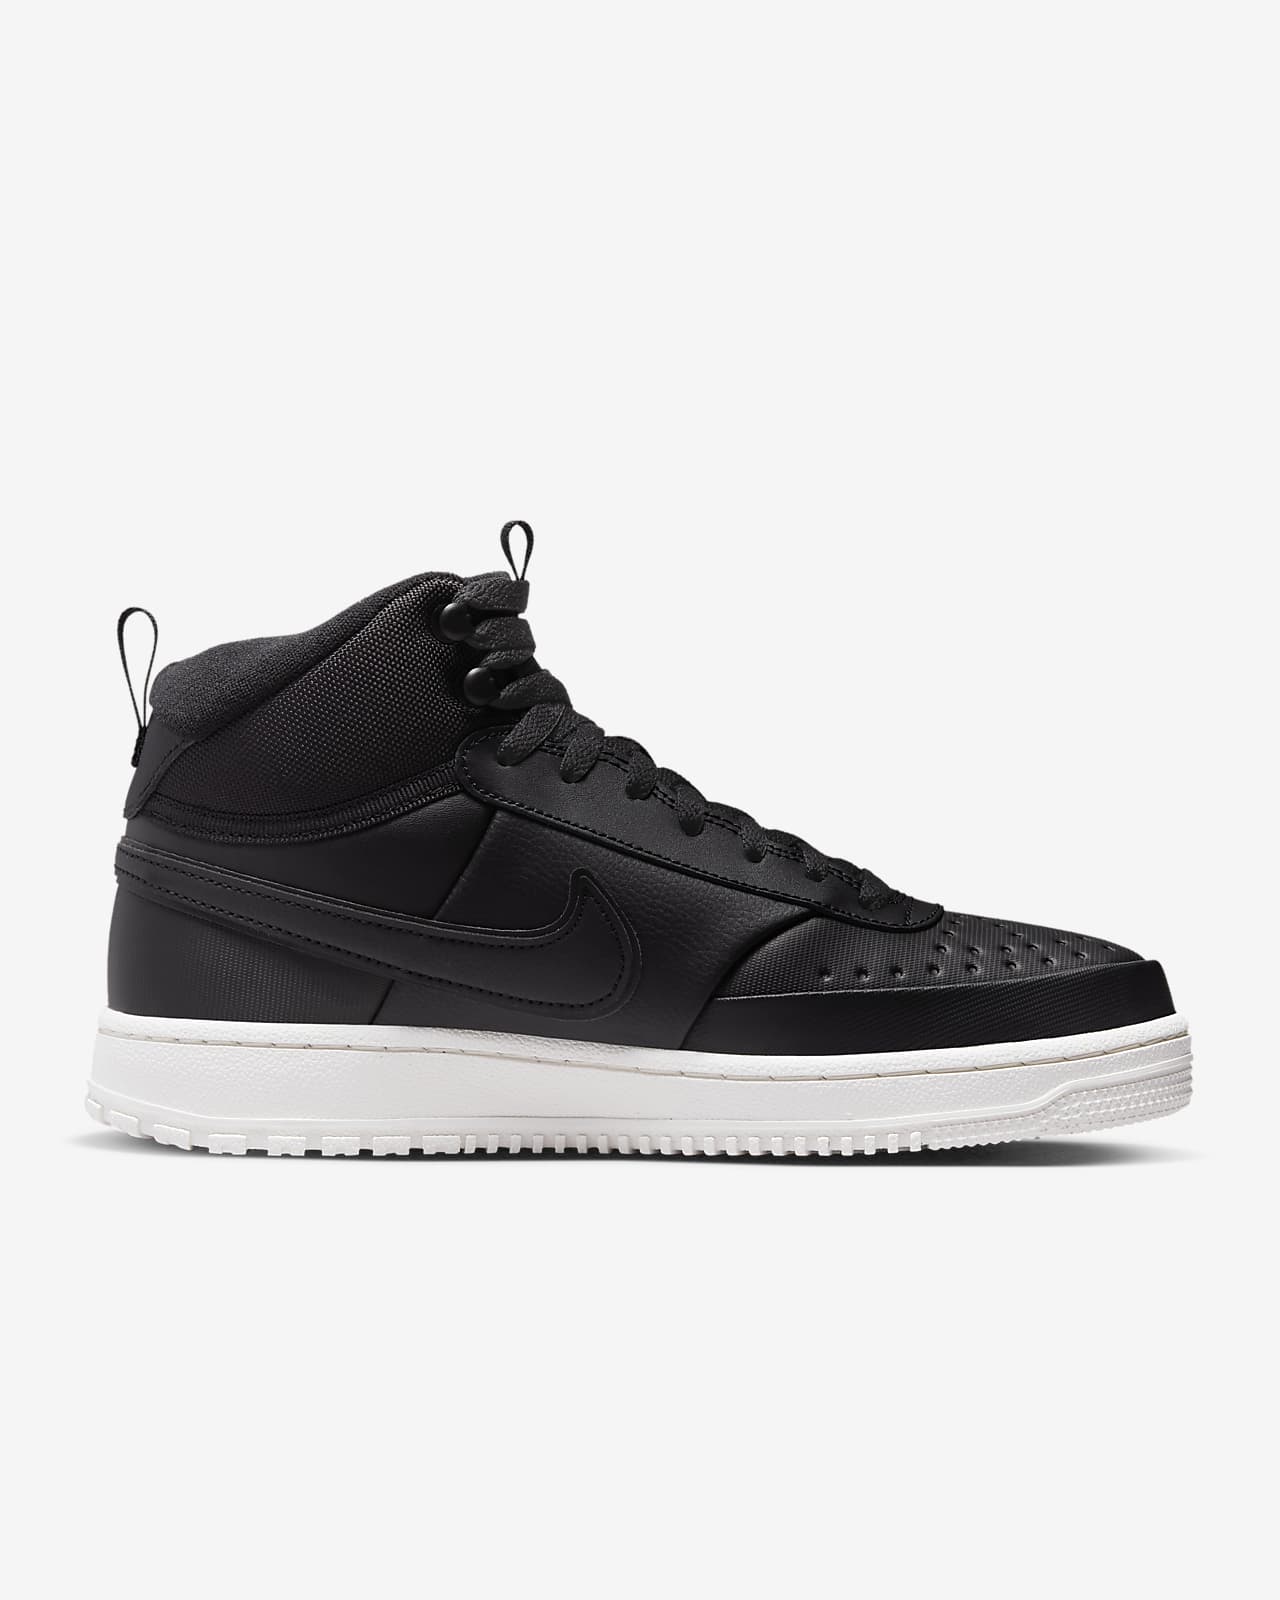 Chaussure mid Homme Nike NIKE COURT VISION MID WNTR Or Sport 2000